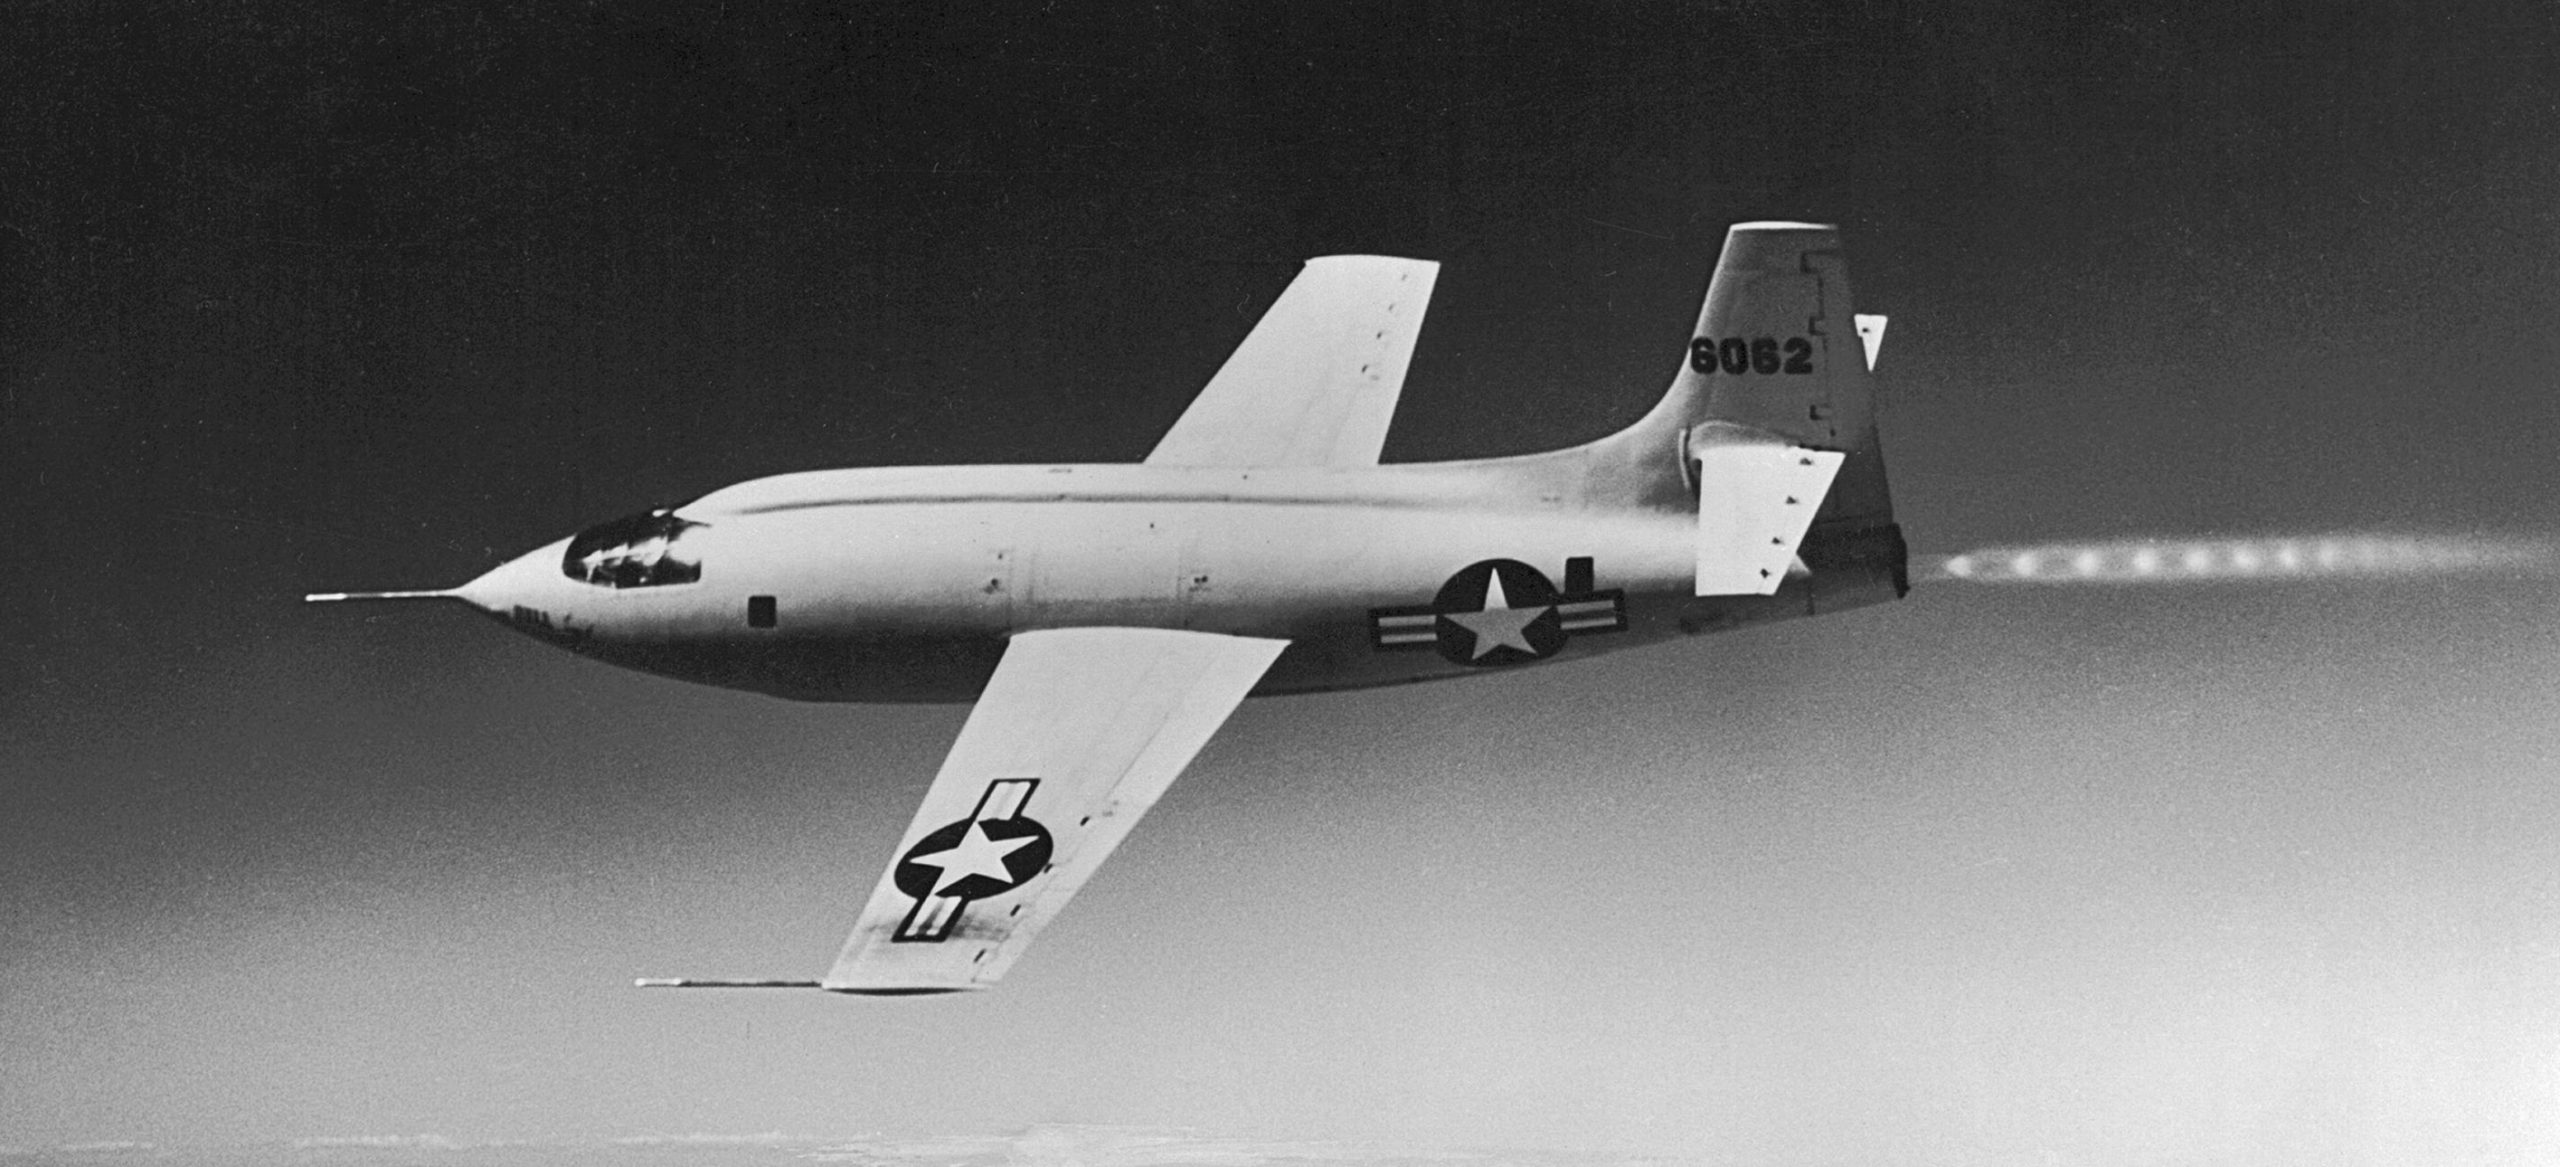 A black and white photograph of an aircraft with stars on the wing and fuselage. It has a distinctive pointed nose and visible afterburner diamonds behind the engine.